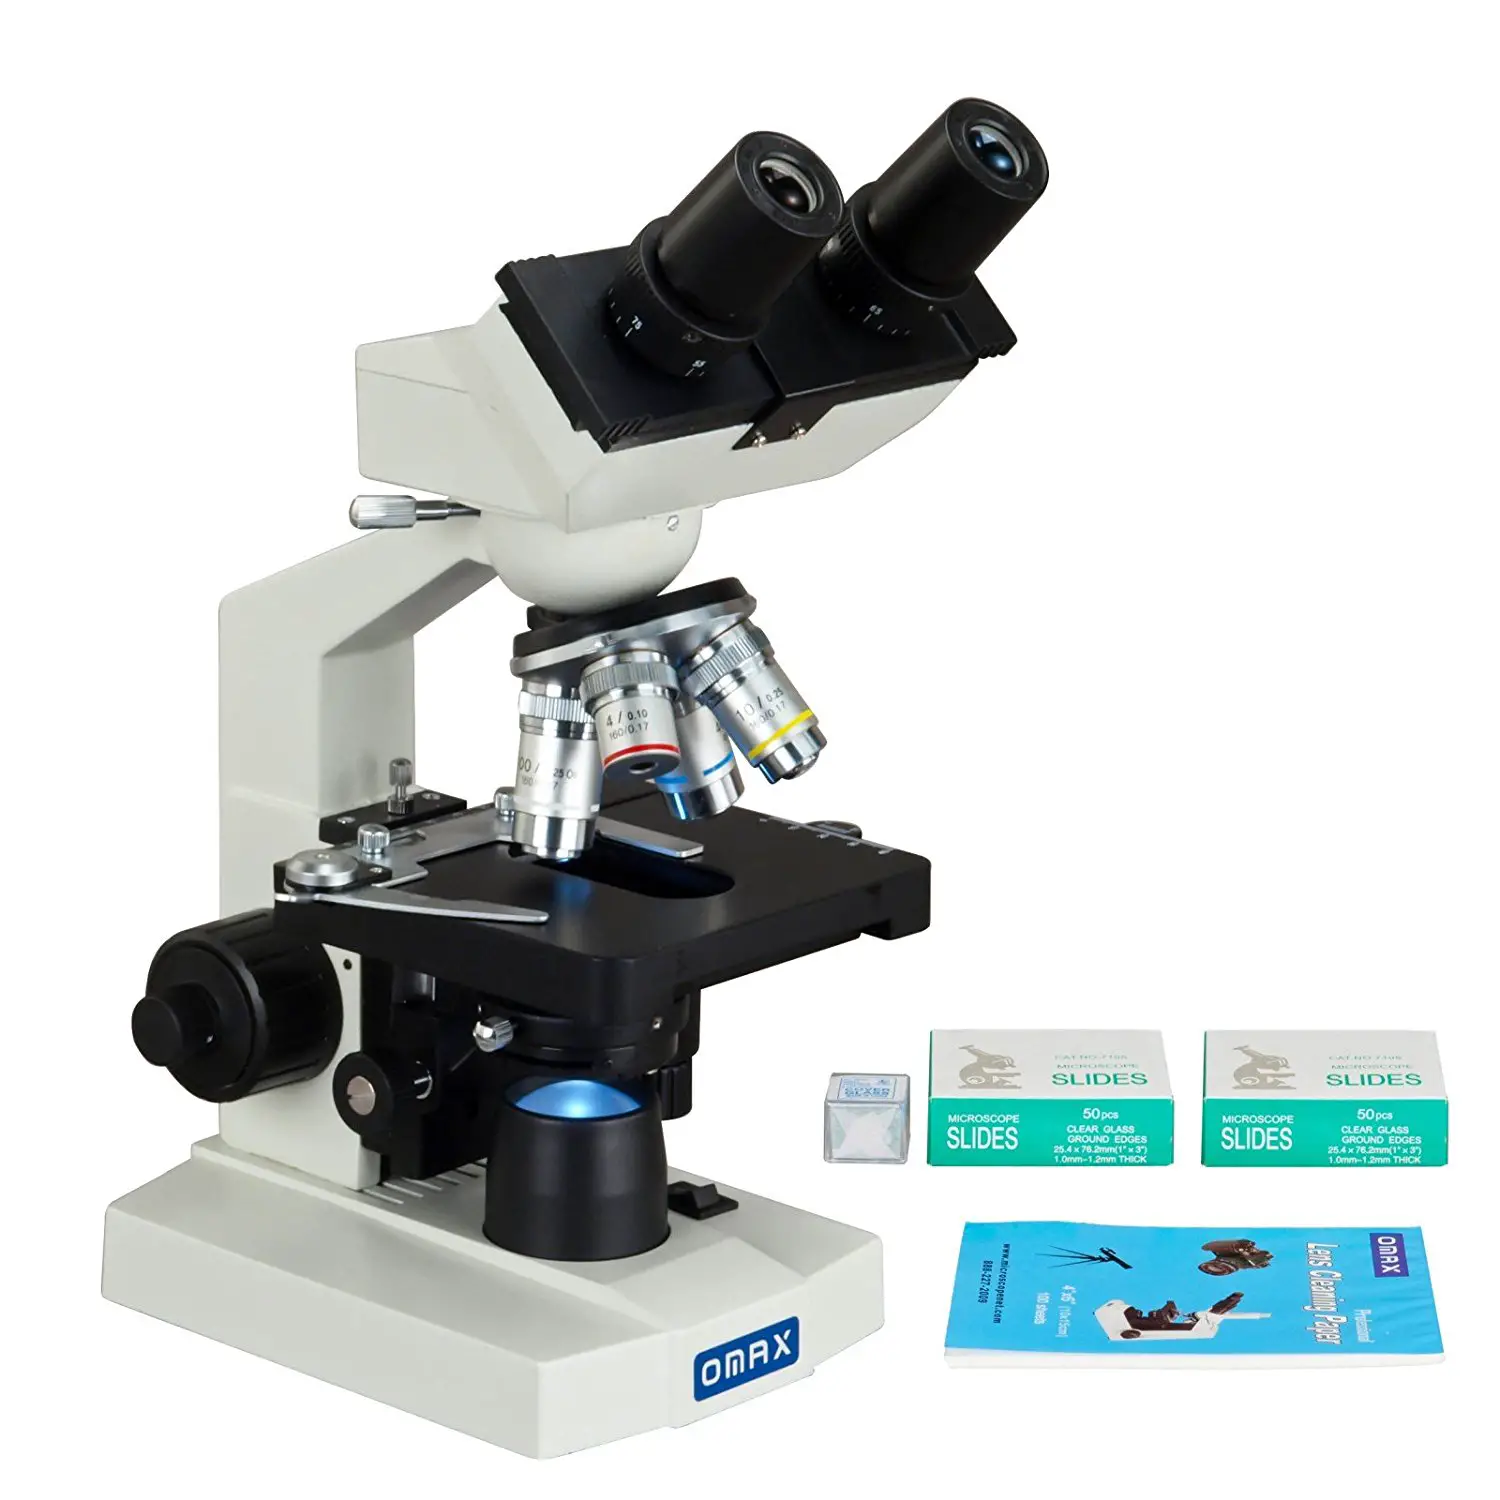 Promotion Set: OMAX 40X-2000X Compound Microscope and more!